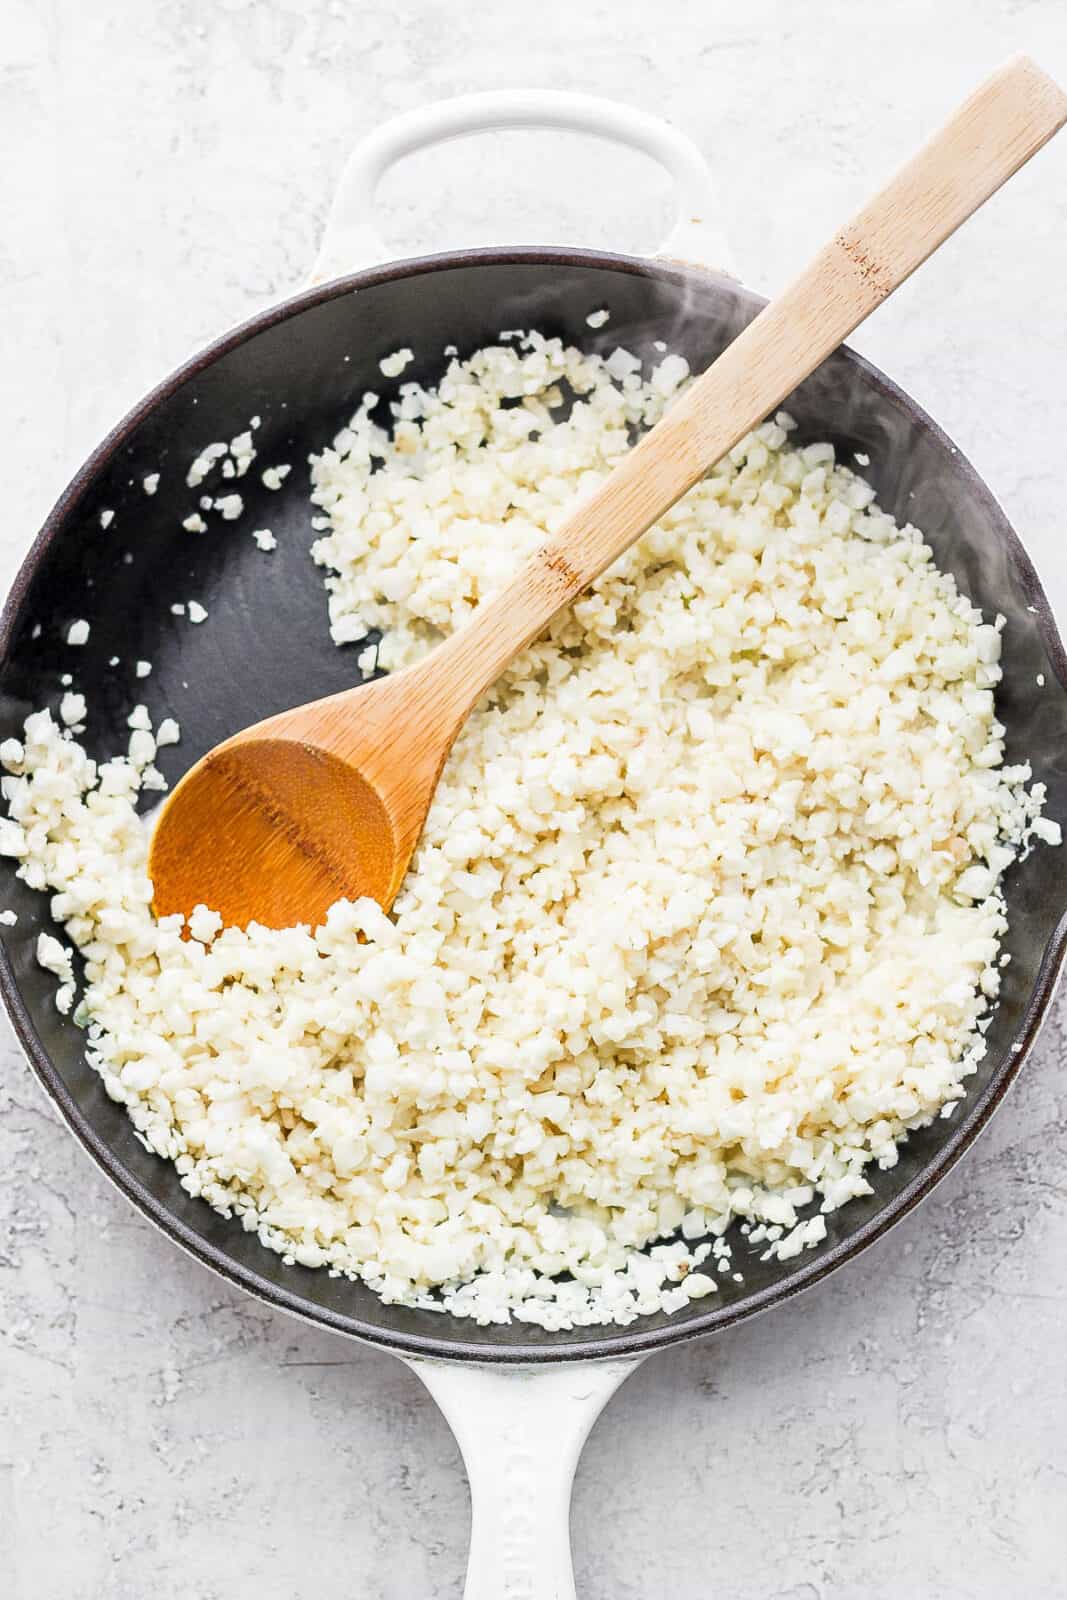 Coconut cauliflower rice in a skillet with a wooden spoon.